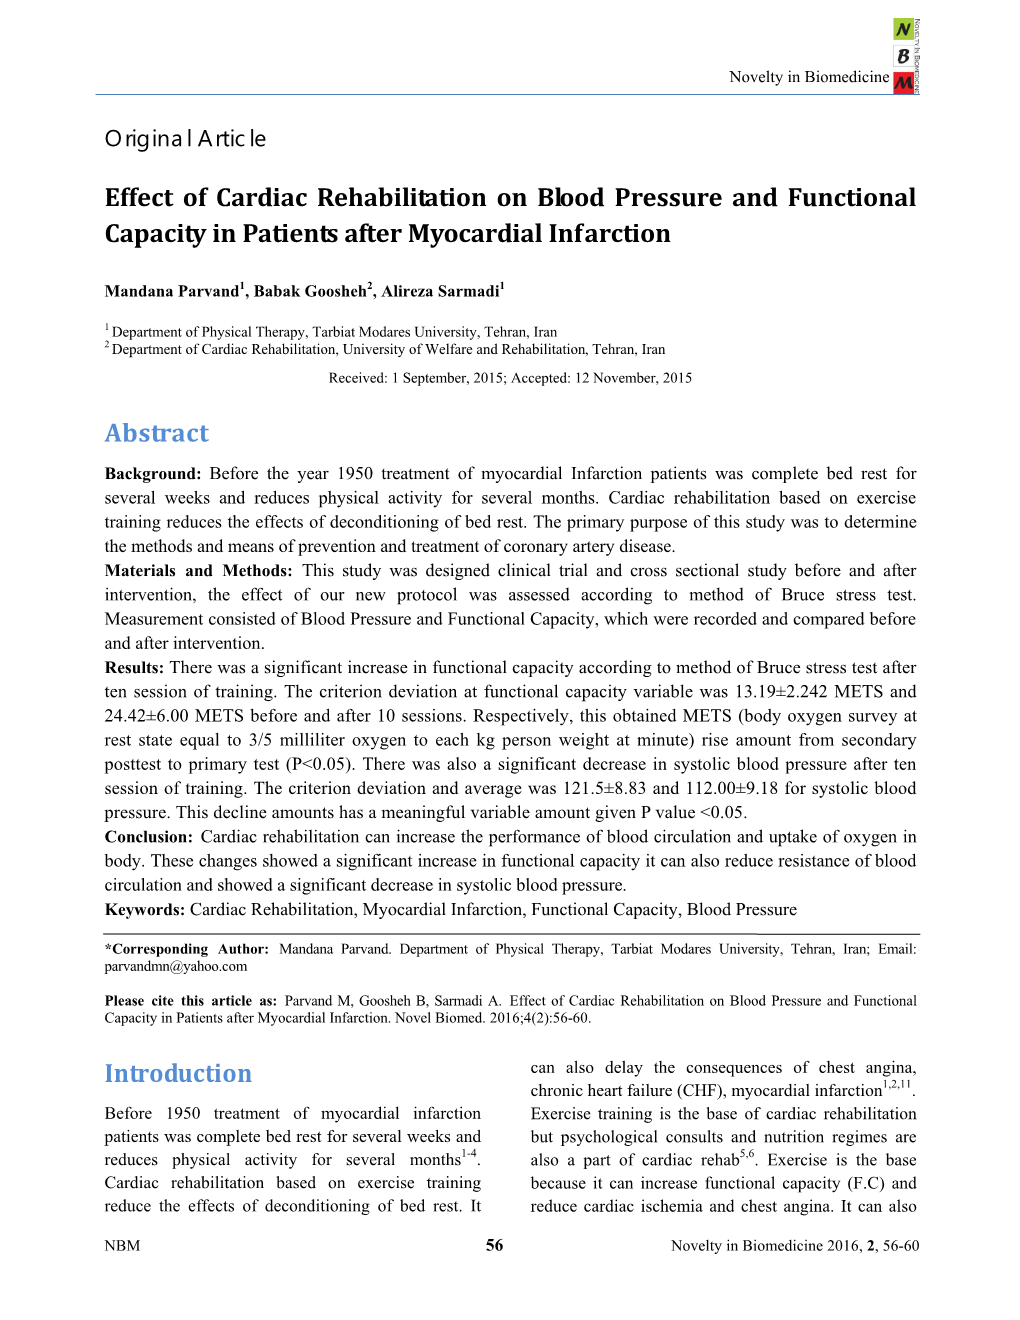 Effect of Cardiac Rehabilitation on Blood Pressure and Functional Capacity in Patients After Myocardial Infarction Abstract Intr